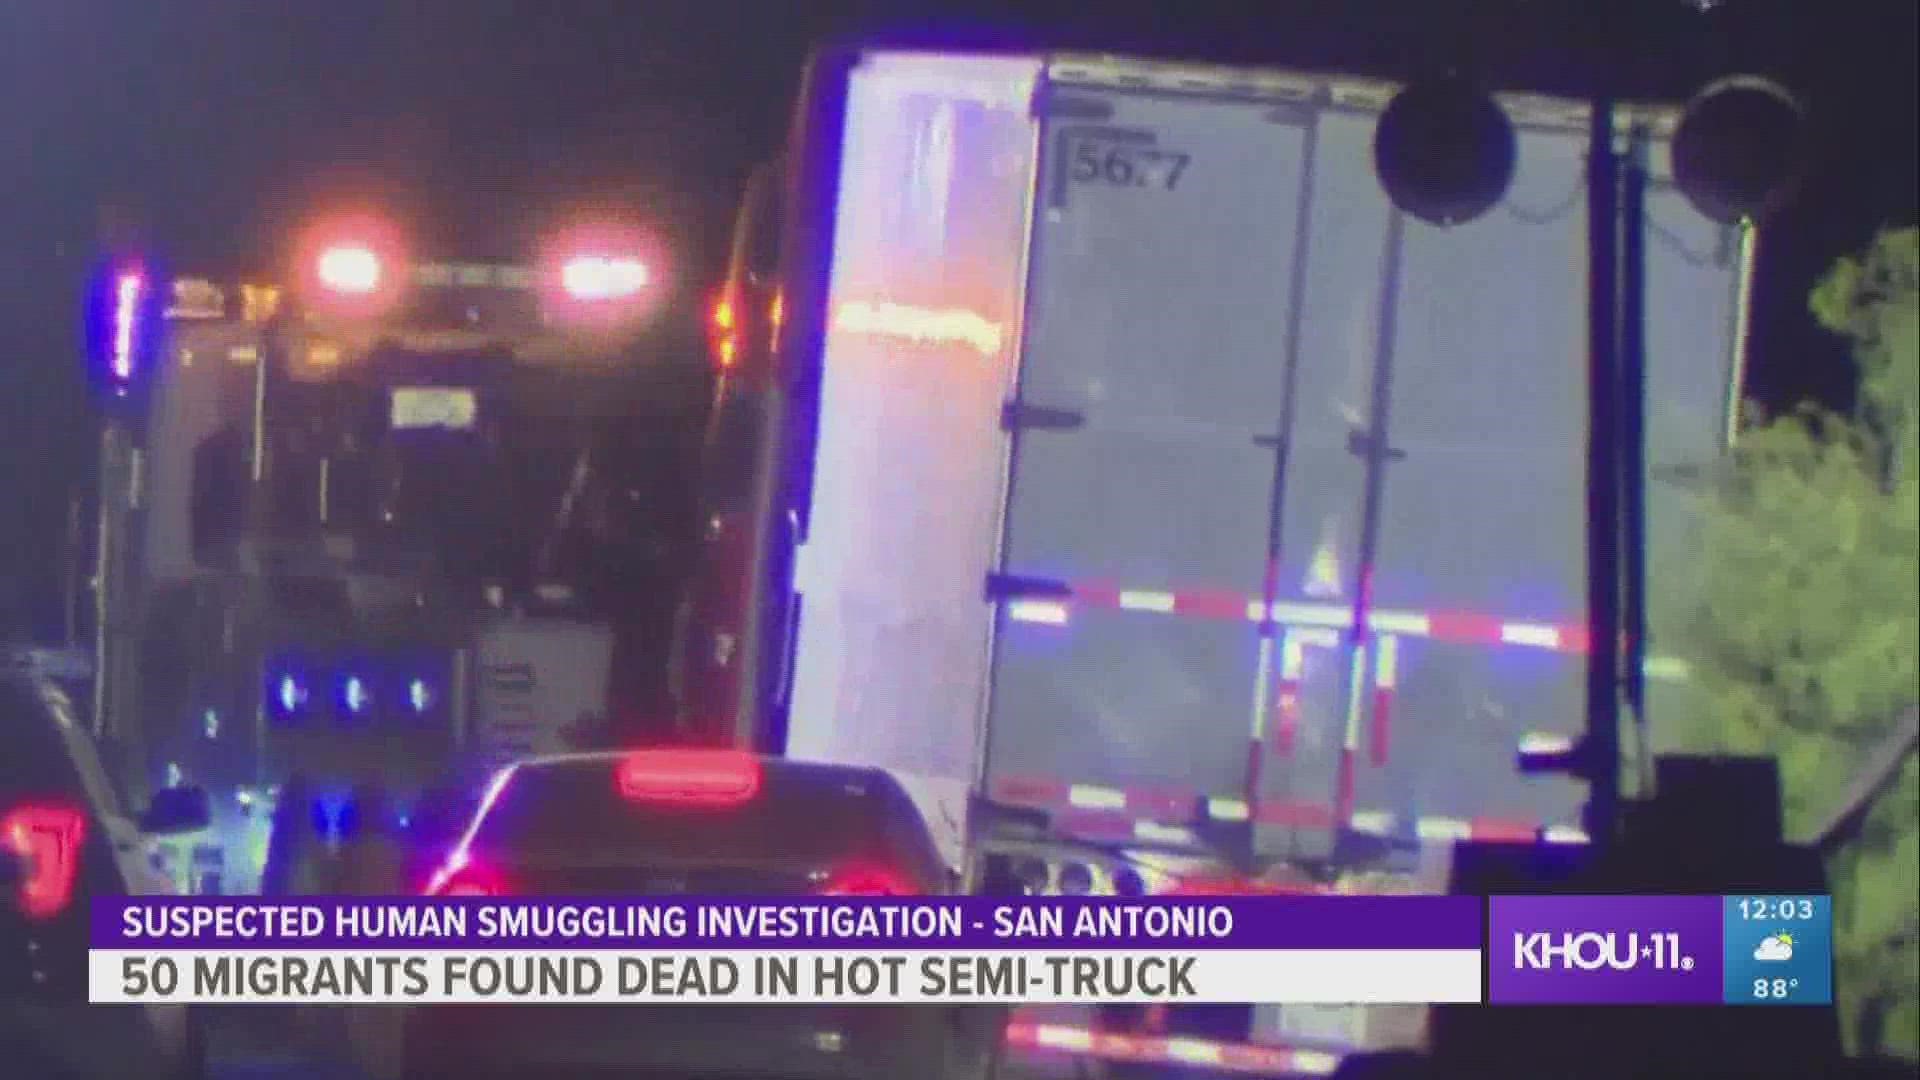 More than four dozen migrants were found dead in the back of an abandoned tractor trailer Monday in southwest San Antonio, officials confirmed.